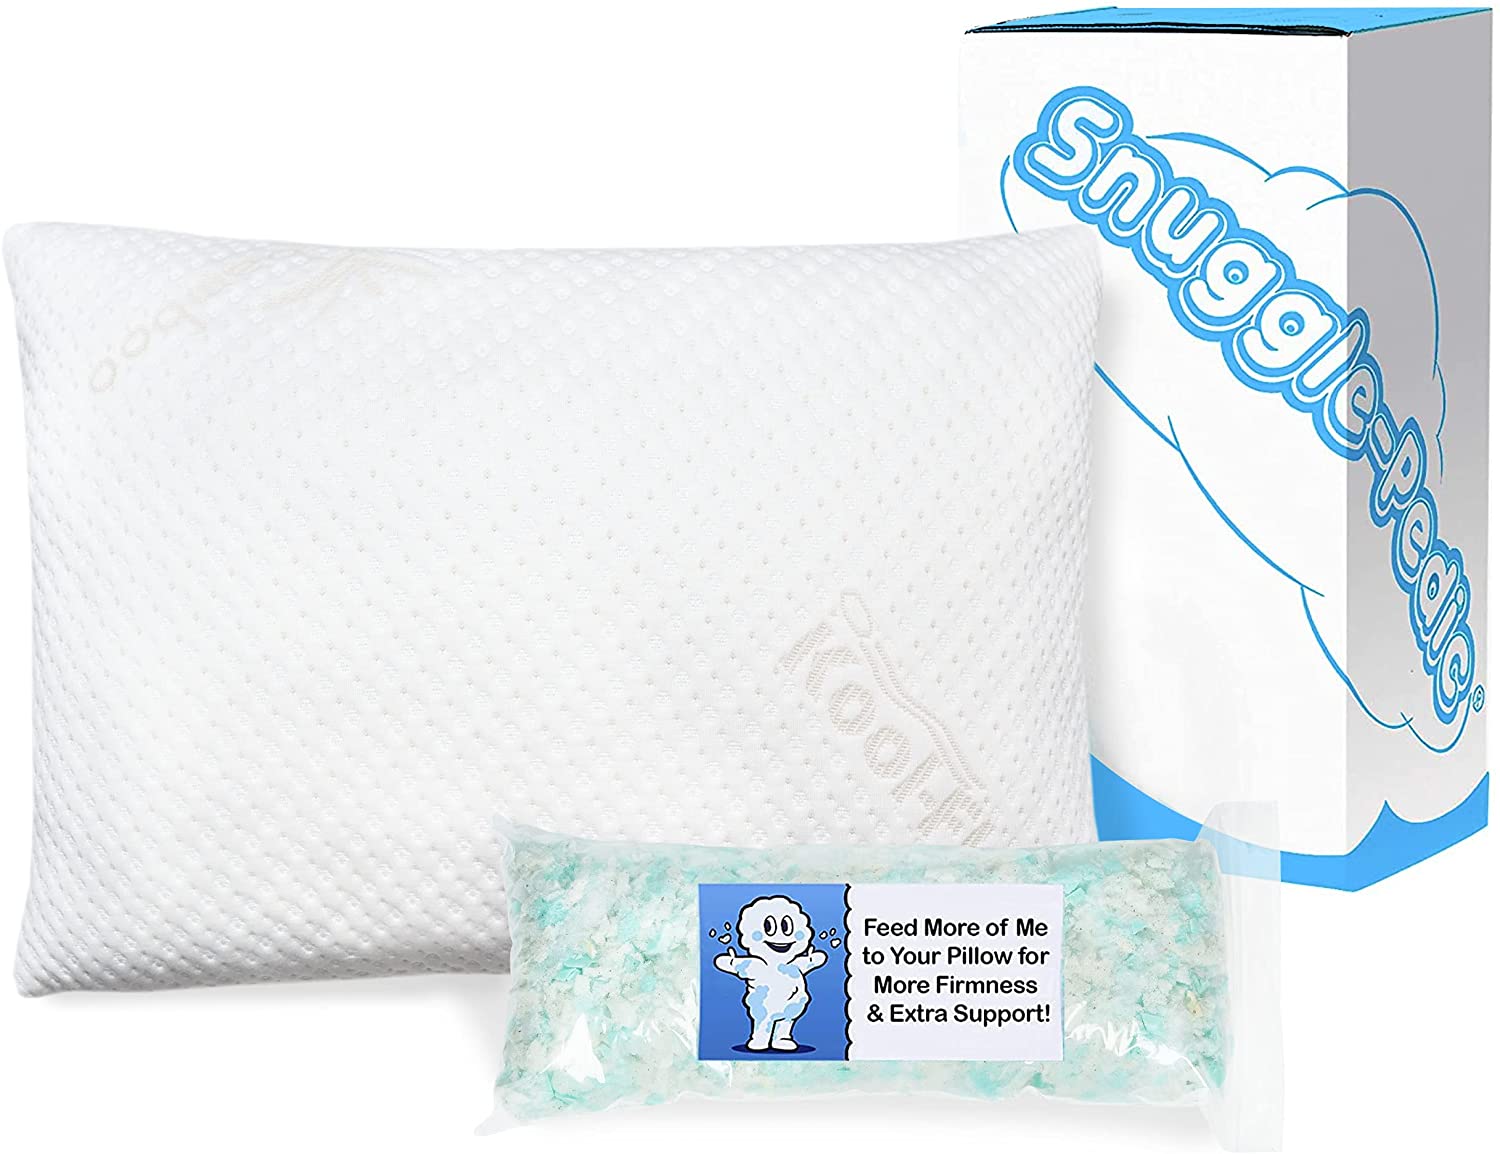 Snuggle-Pedic Adjustable Shredded Memory Foam Pillow Standard Queen or King 50% Off w/ Coupon